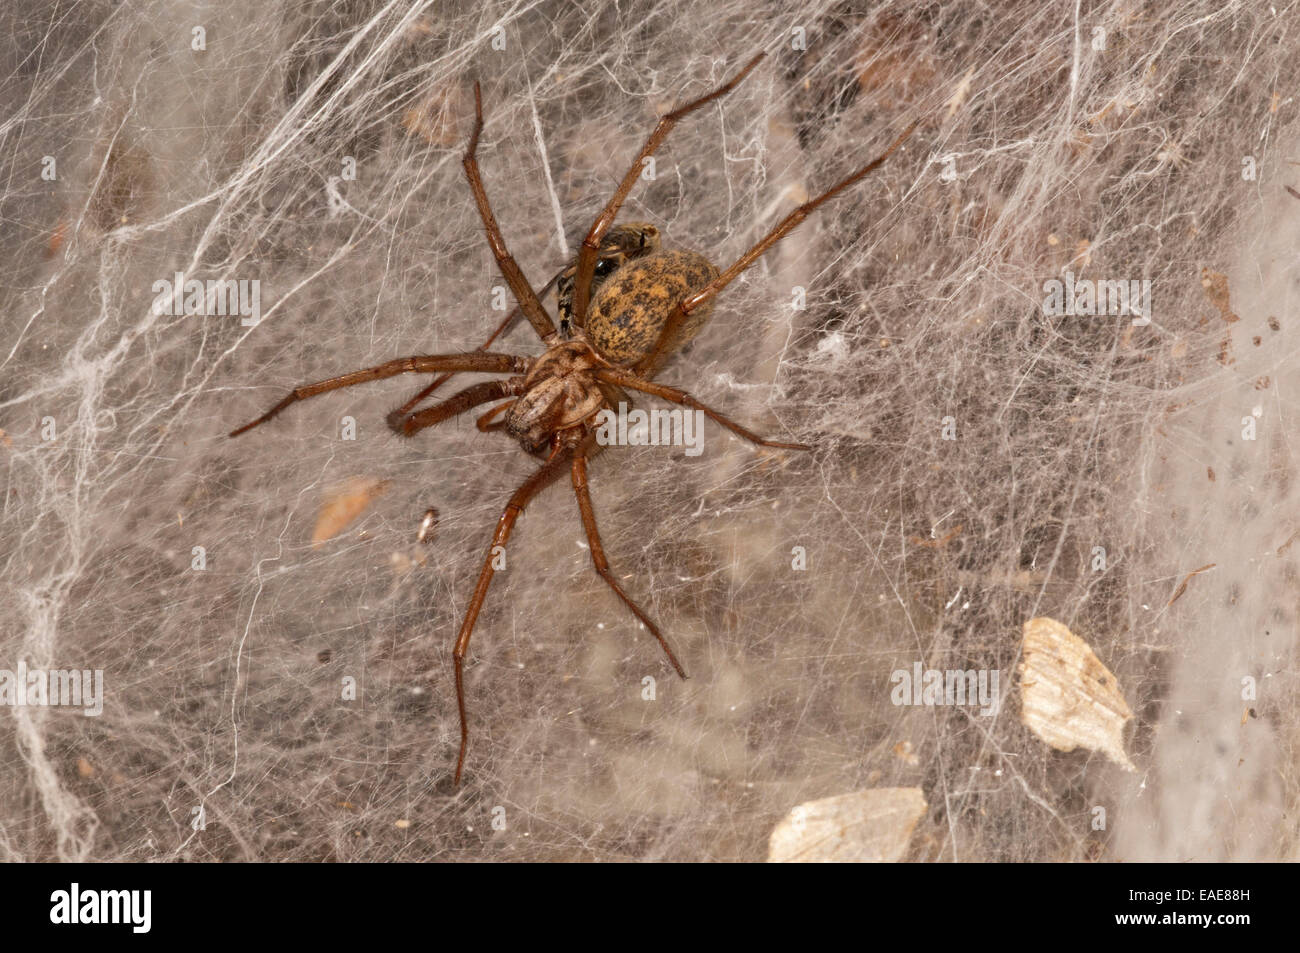 Dust spider or Dustbunny Spider (Tegenaria atrica) in the spiderweb, Baden-Württemberg, Germany Stock Photo